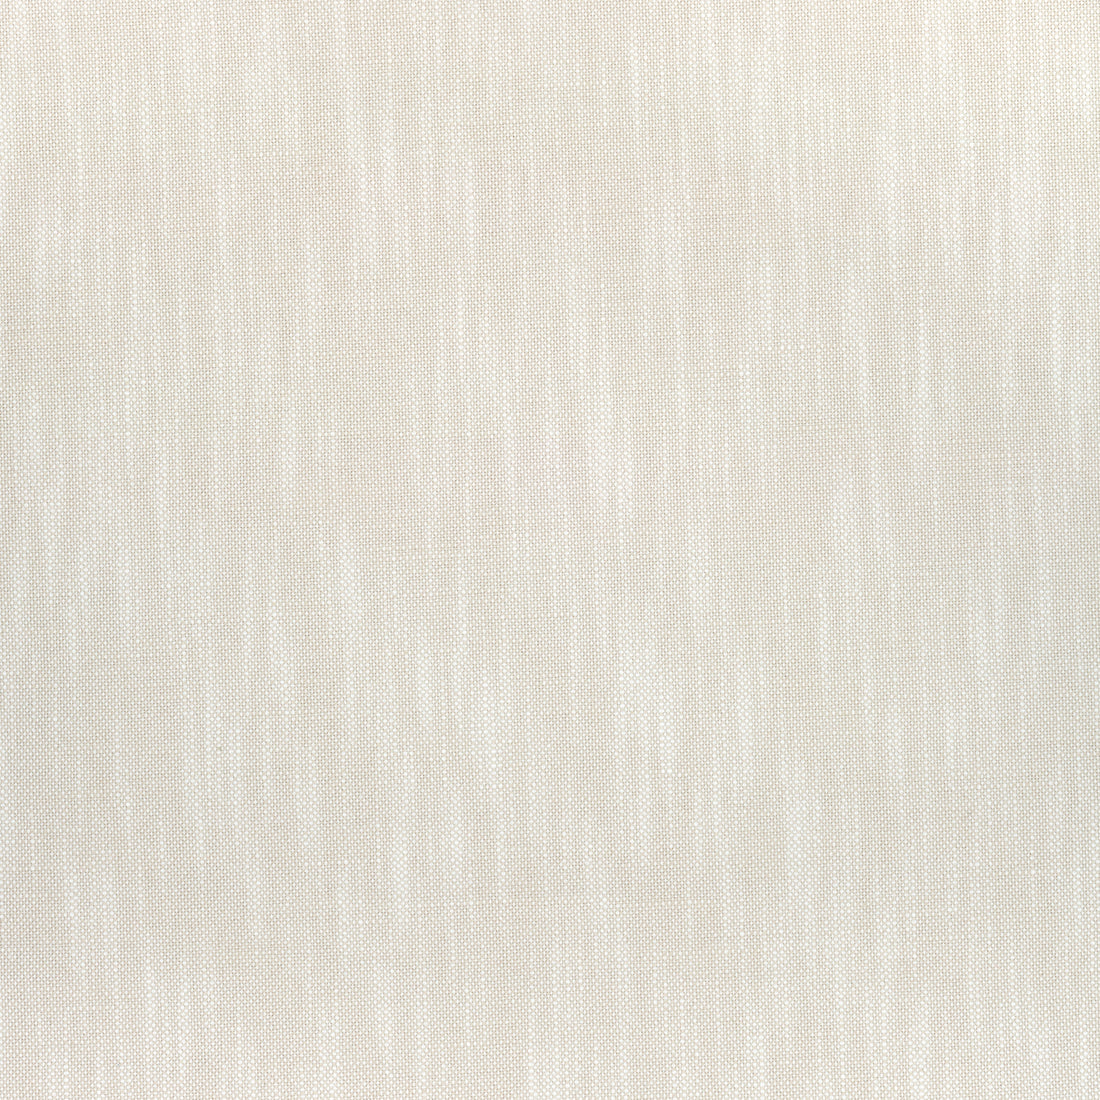 Bristol fabric in flax color - pattern number W73416 - by Thibaut in the Landmark Textures collection